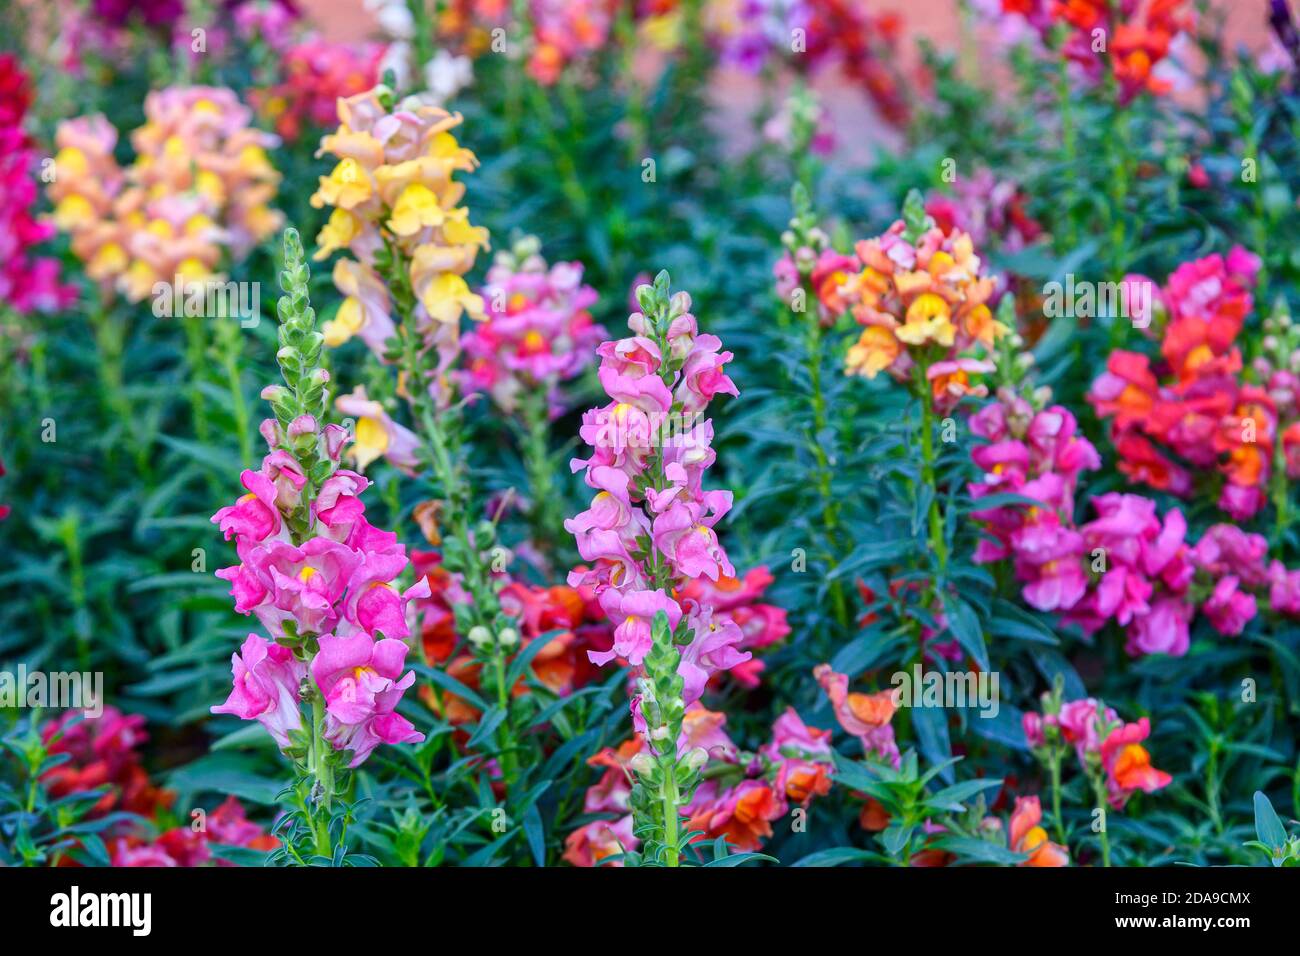 Beautiful Antirrhinum majus dragon flower also known as Snap Dragons and Tagetes patula (French Marigolds) is blooming in the garden. Stock Photo